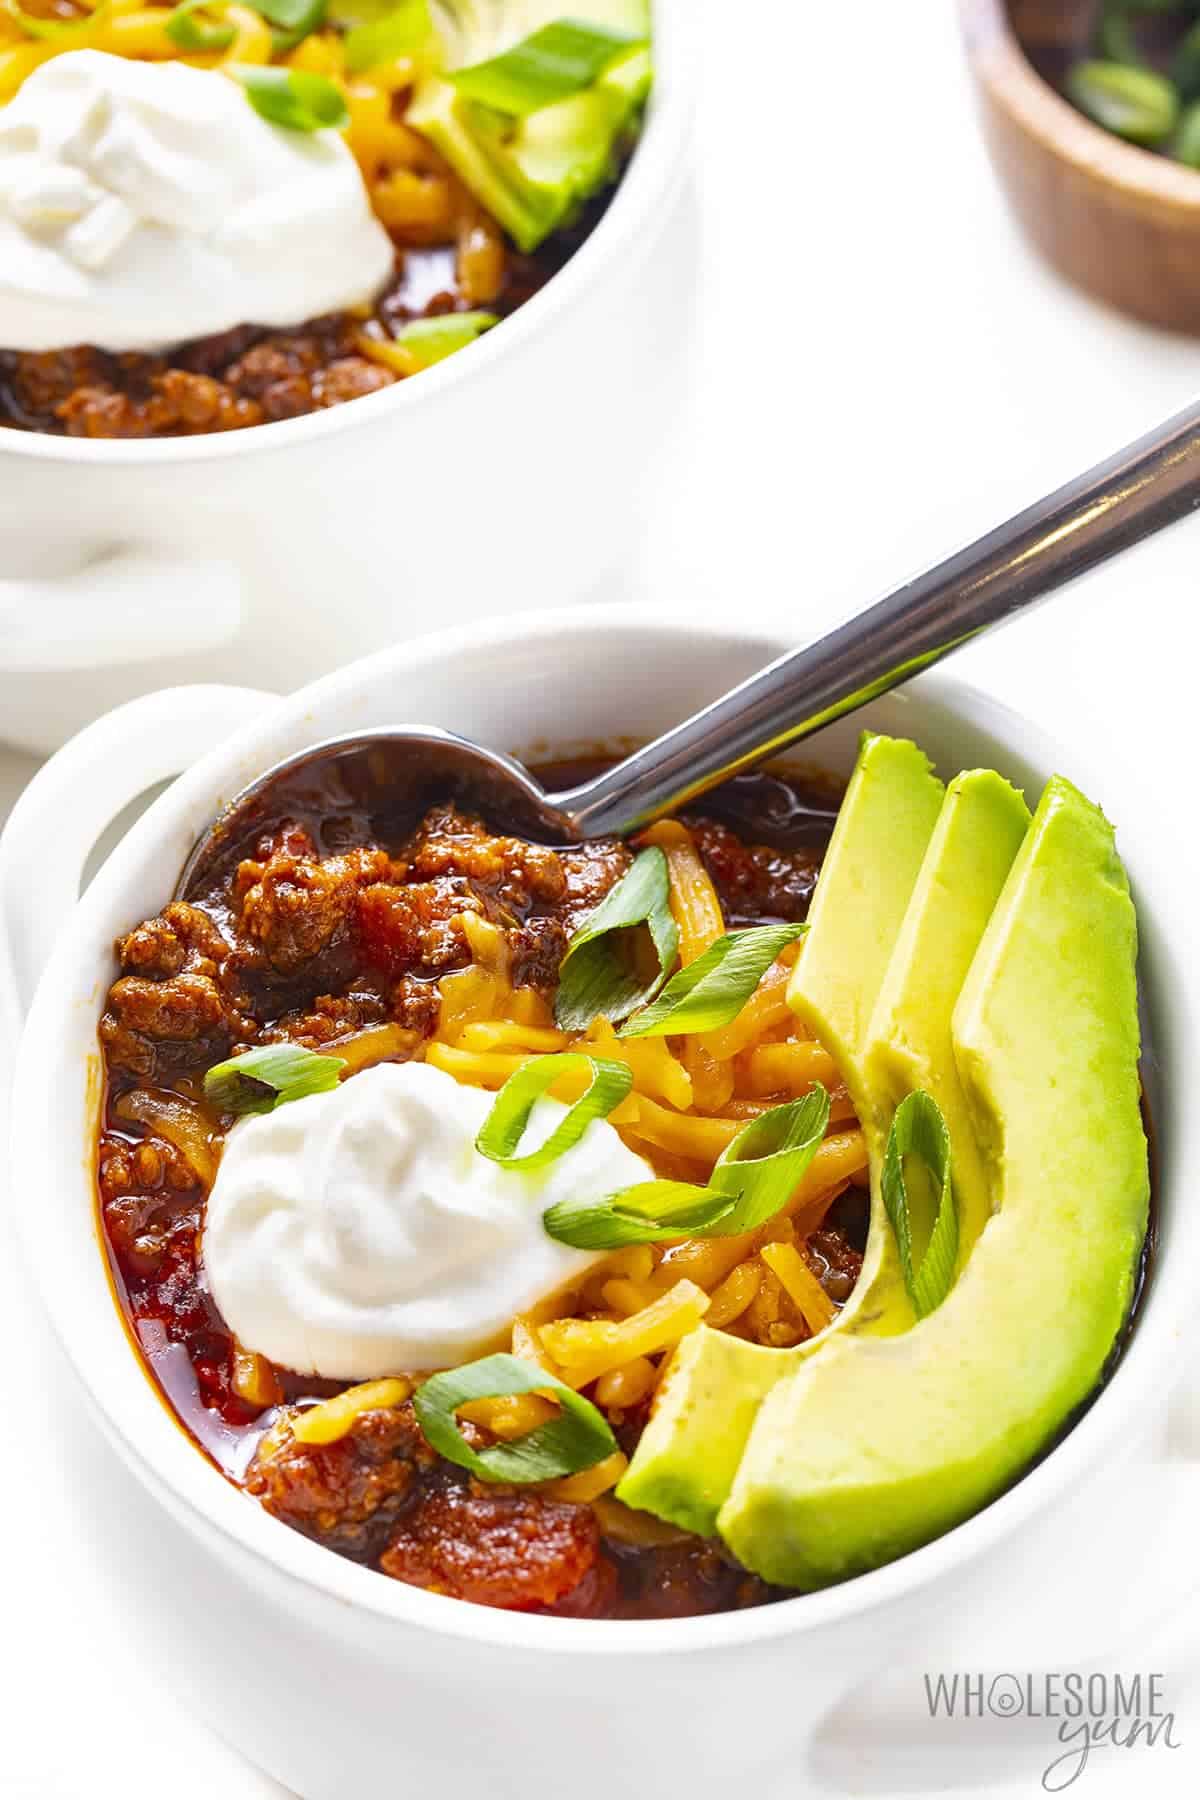 Bowls of low carb chili.